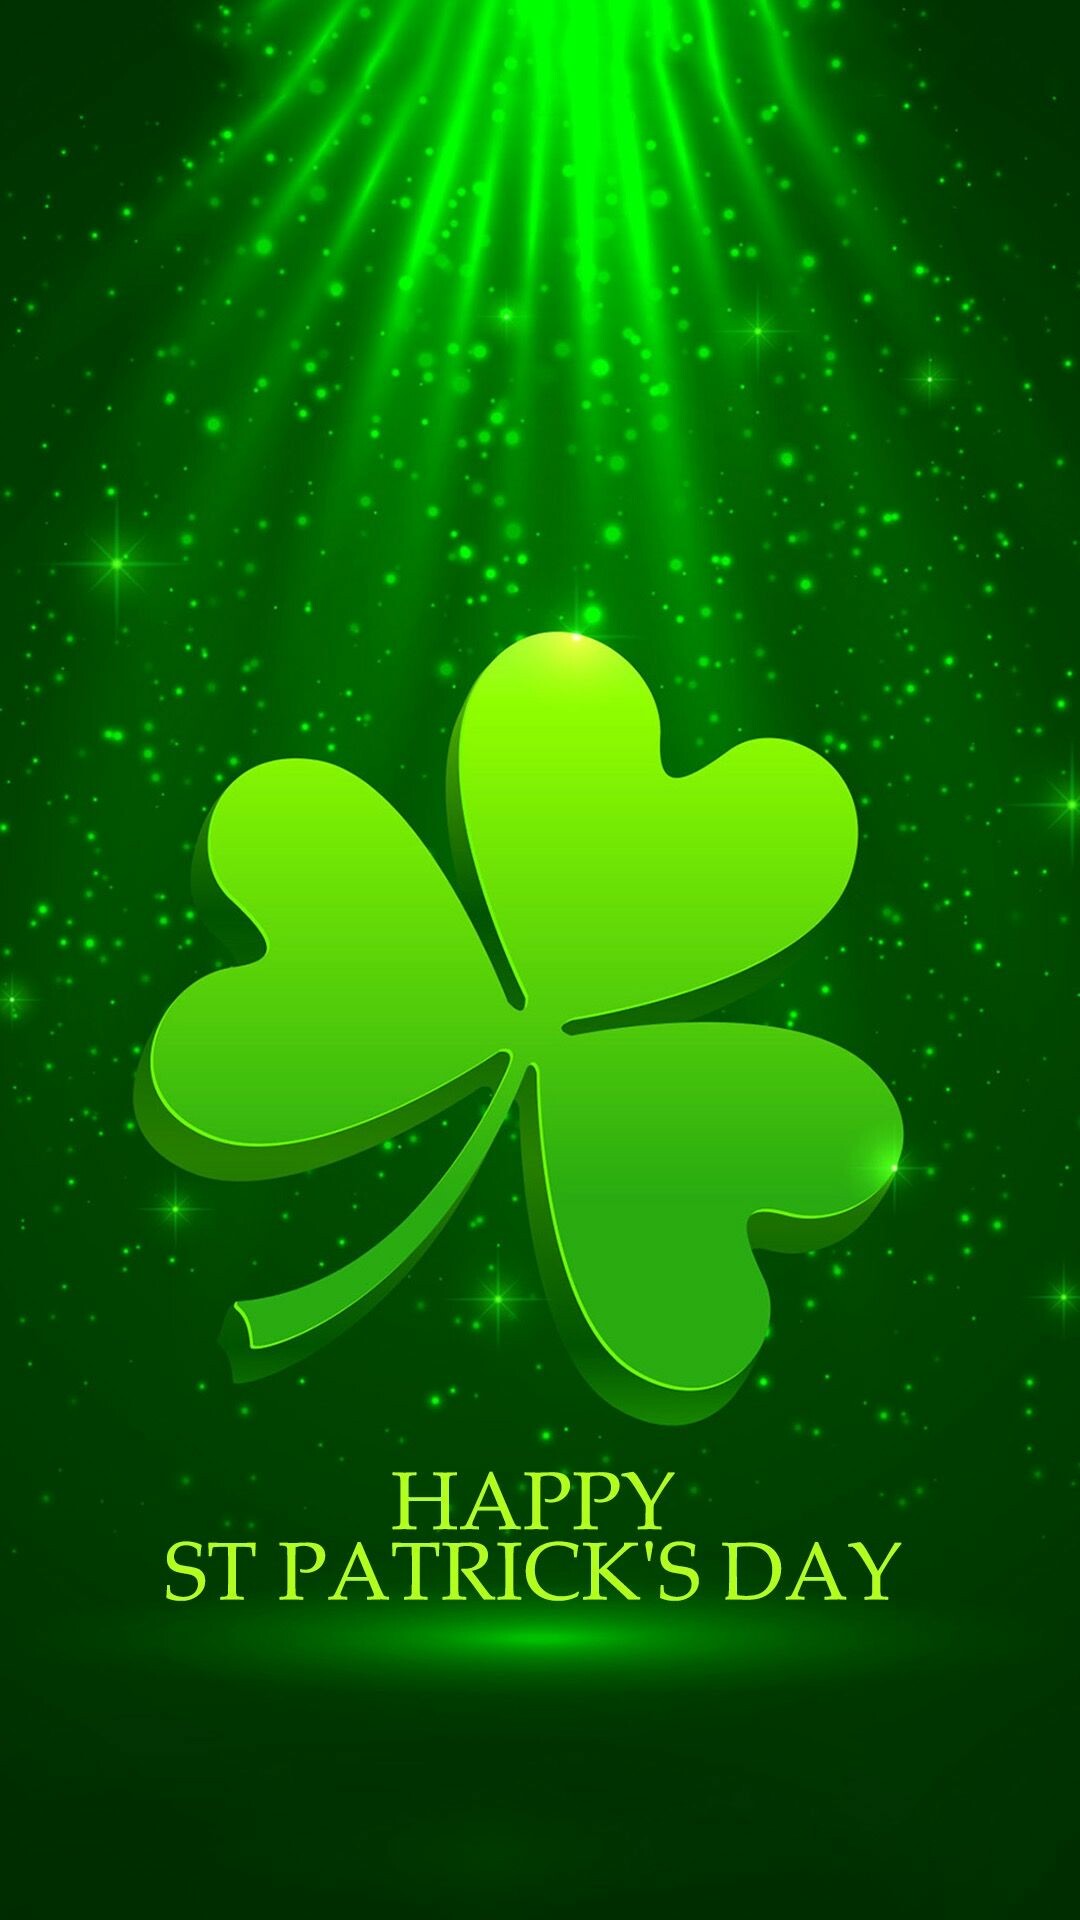 Saint Patrick's Day: Celebrated in honor of a Christian missionary born in the 4th century and the primary patron saint of Ireland. 1080x1920 Full HD Background.